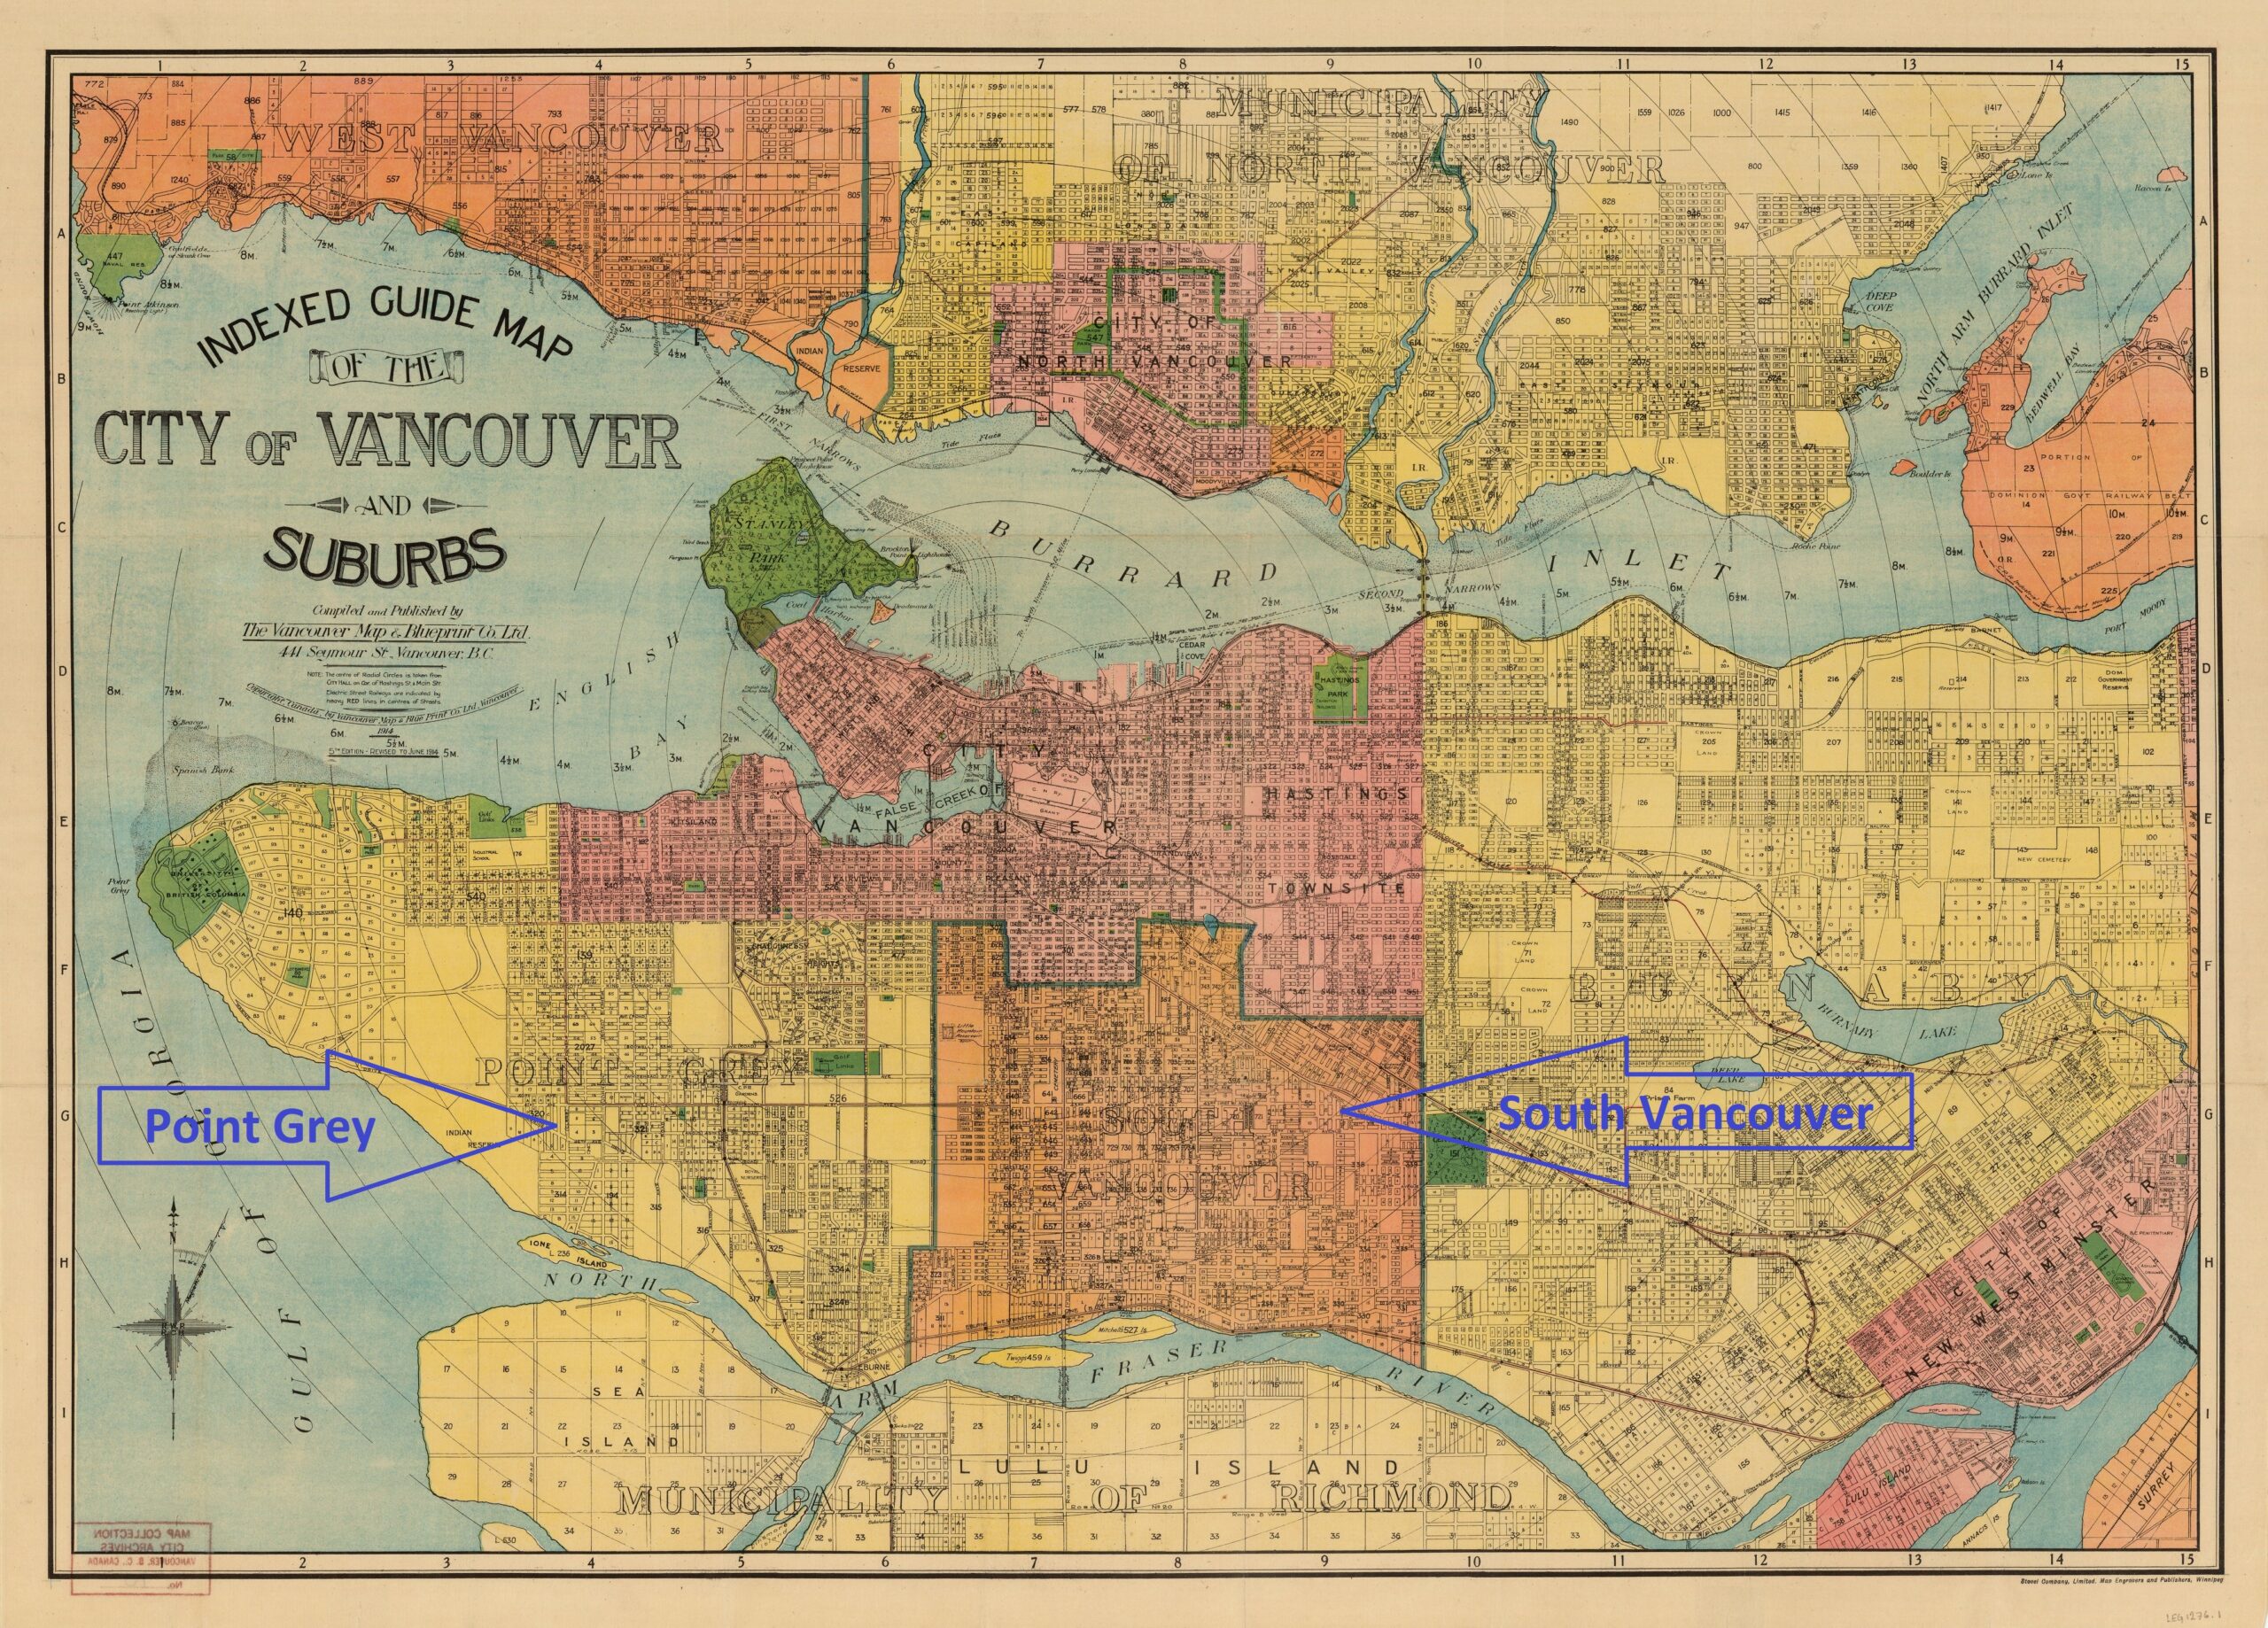 Map showing the boundaries of the City of Vancouver, South Vancouver, and Point Grey, 1914. Reference code: AM1594-: MAP 70-: LEG1276.1